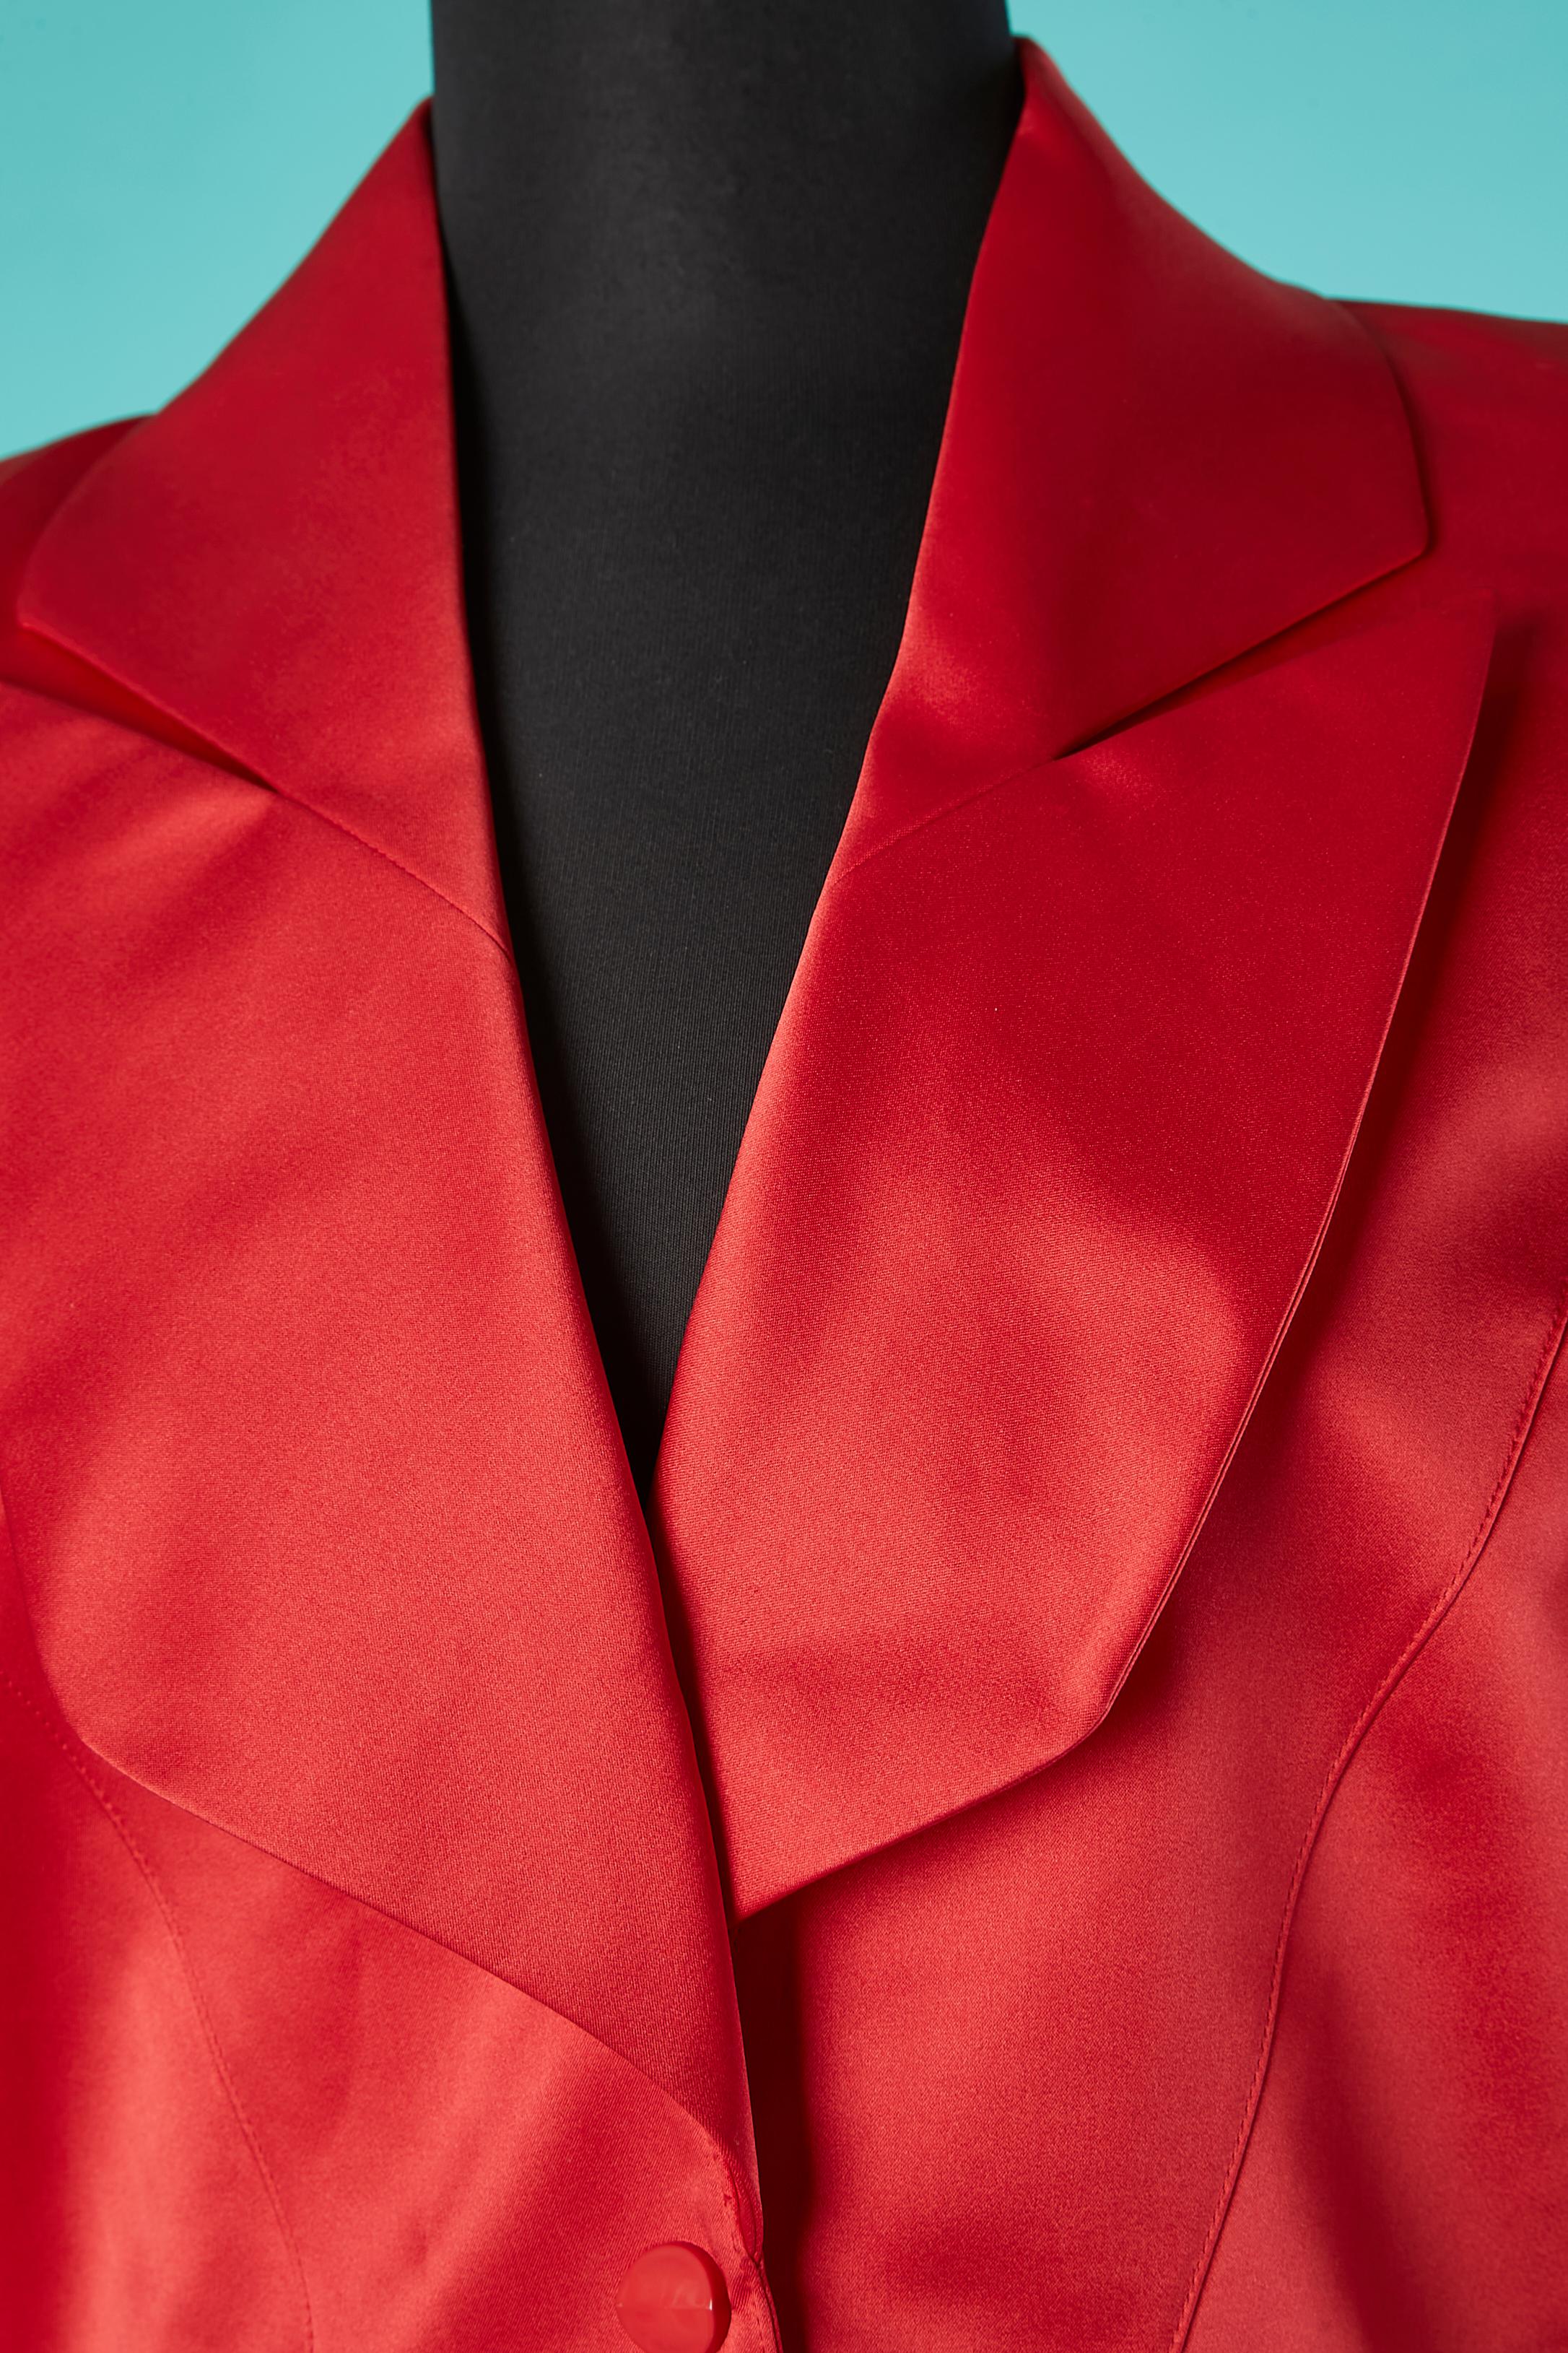 Red silk satin skirt -suit. Main fabric: 51% silk, 49% acetate. 
No fabric composition tag for the lining but probably looks like satin. 
Shoulder-pads. Snap closure in the middle front + one hidden button and buttonhole at the bottom end of the